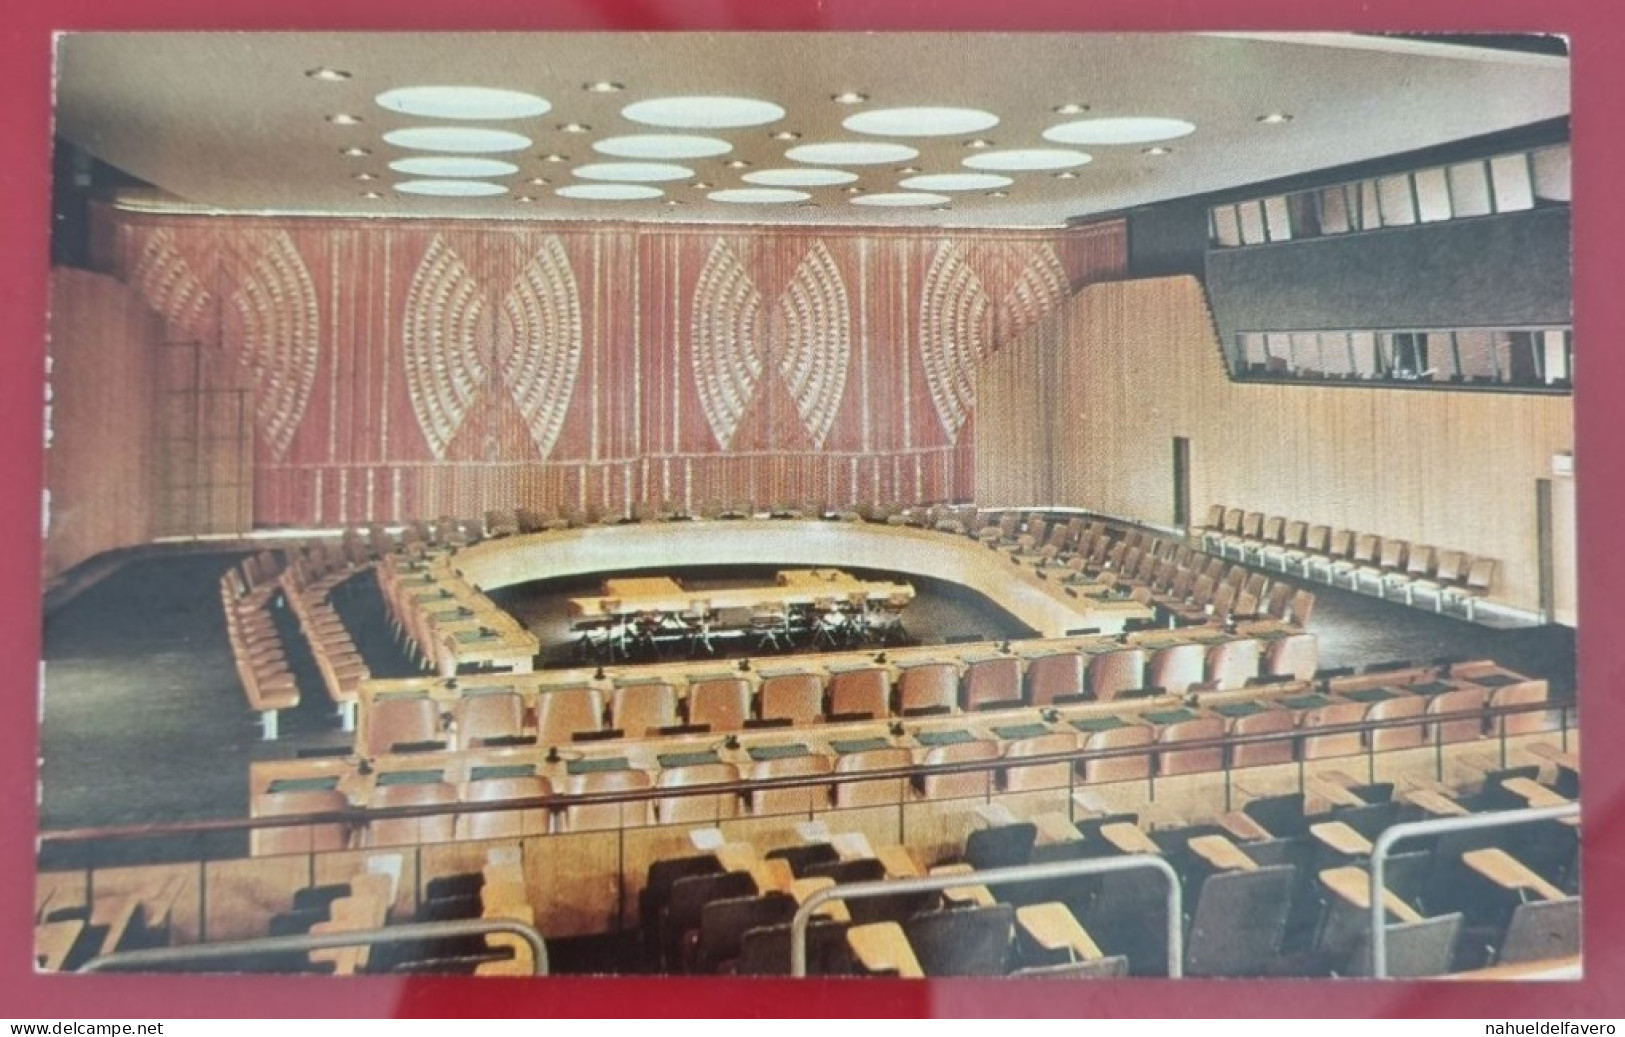 Uncirculated Postcard - USA - NY, NEW YORK CITY - UNITED NATIONS, ECONOMIC AND SOCIAL COUNCIL CHAMBER - Plaatsen & Squares